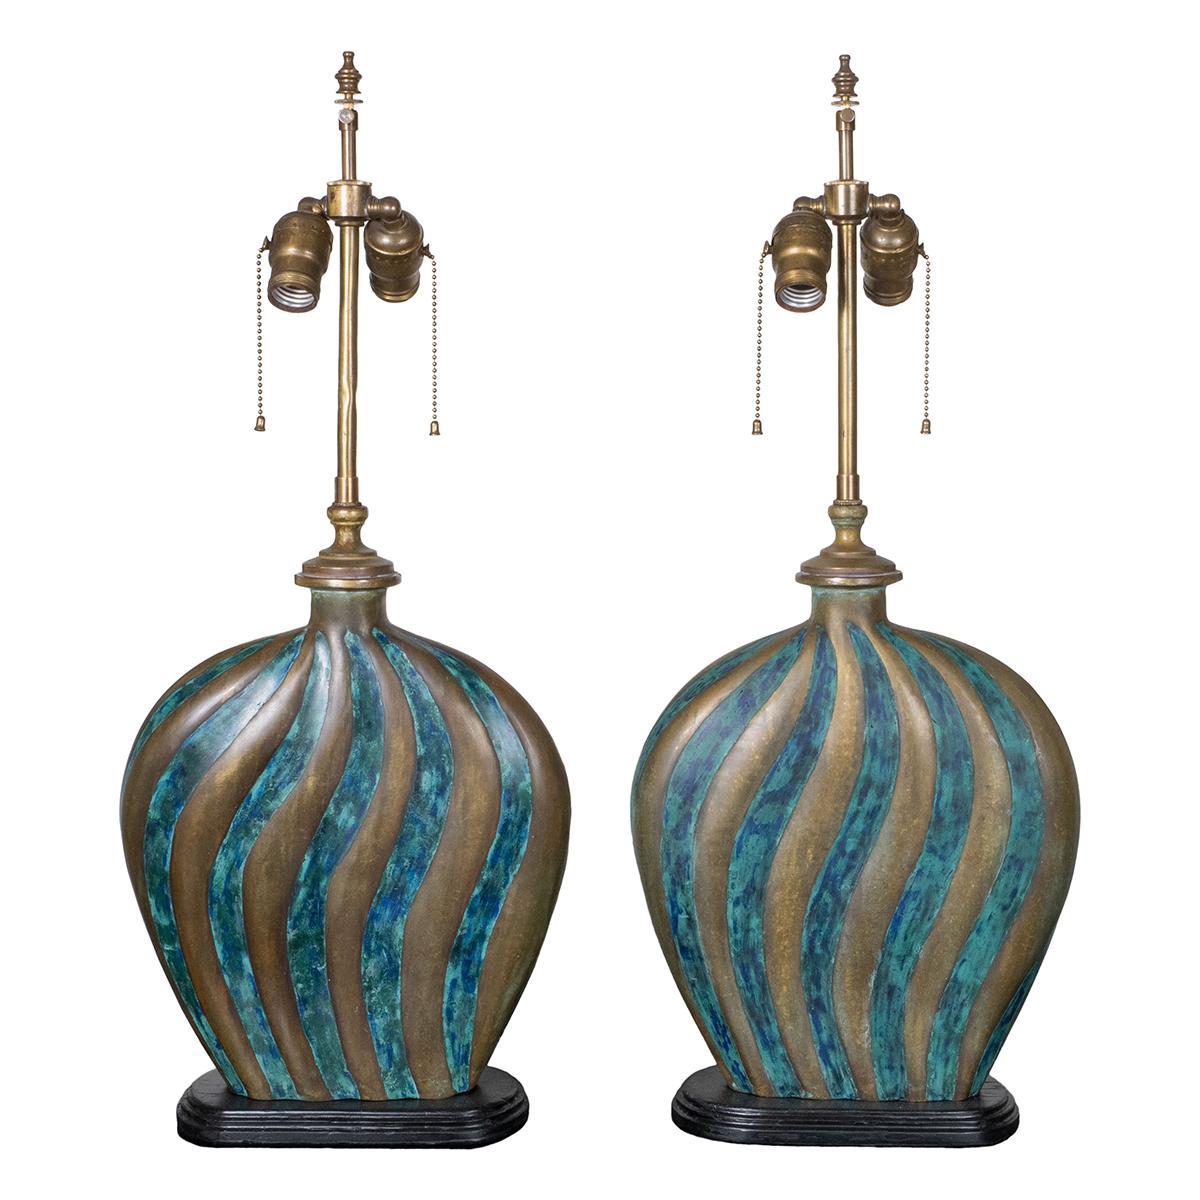 Pair of rare bronze table lamps on wood bases with turquoise 